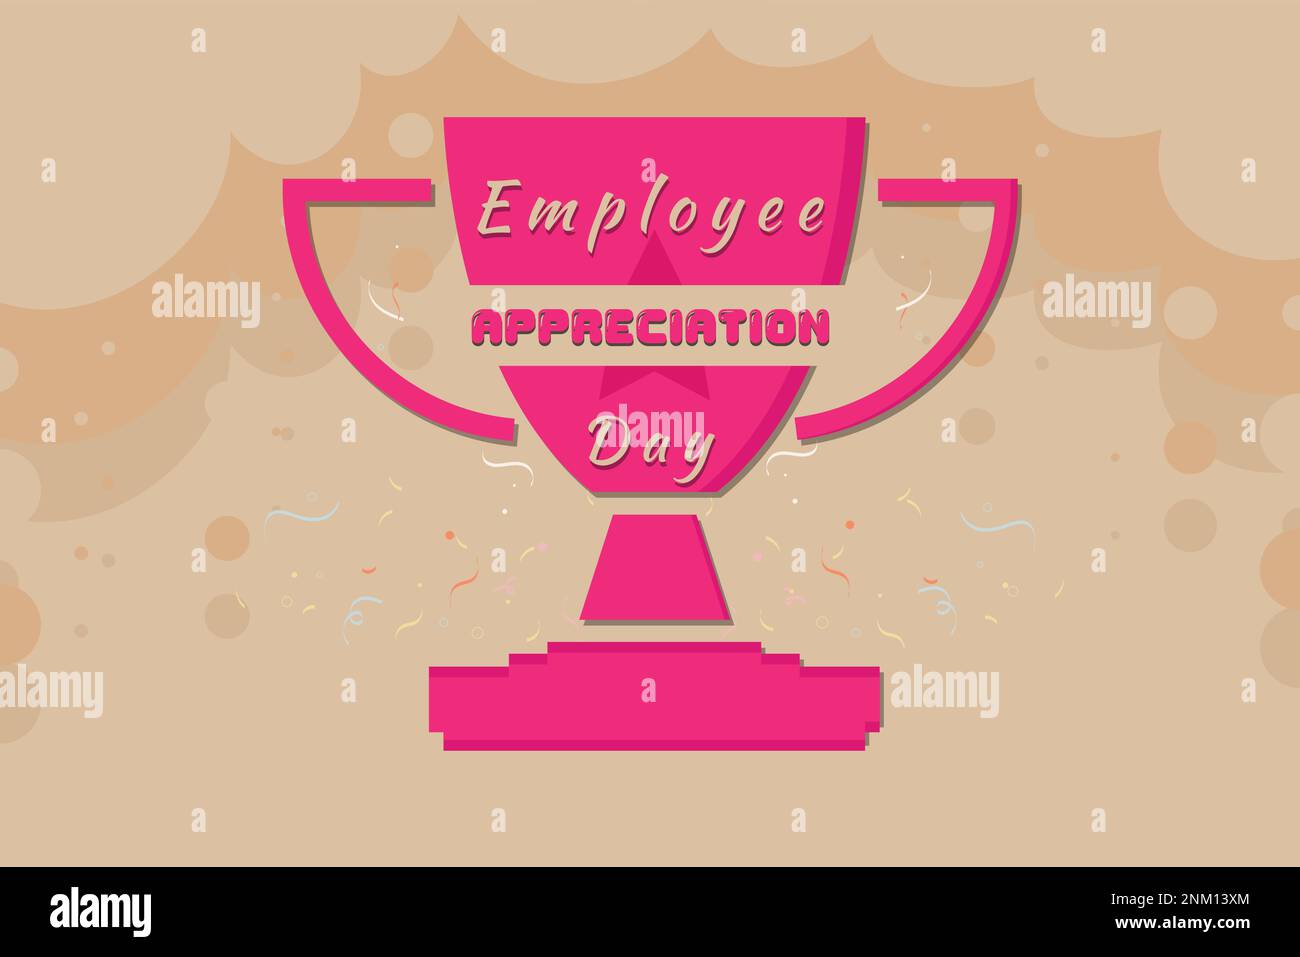 Happy Employee Appreciation Day, Employee of the month Stock Vector